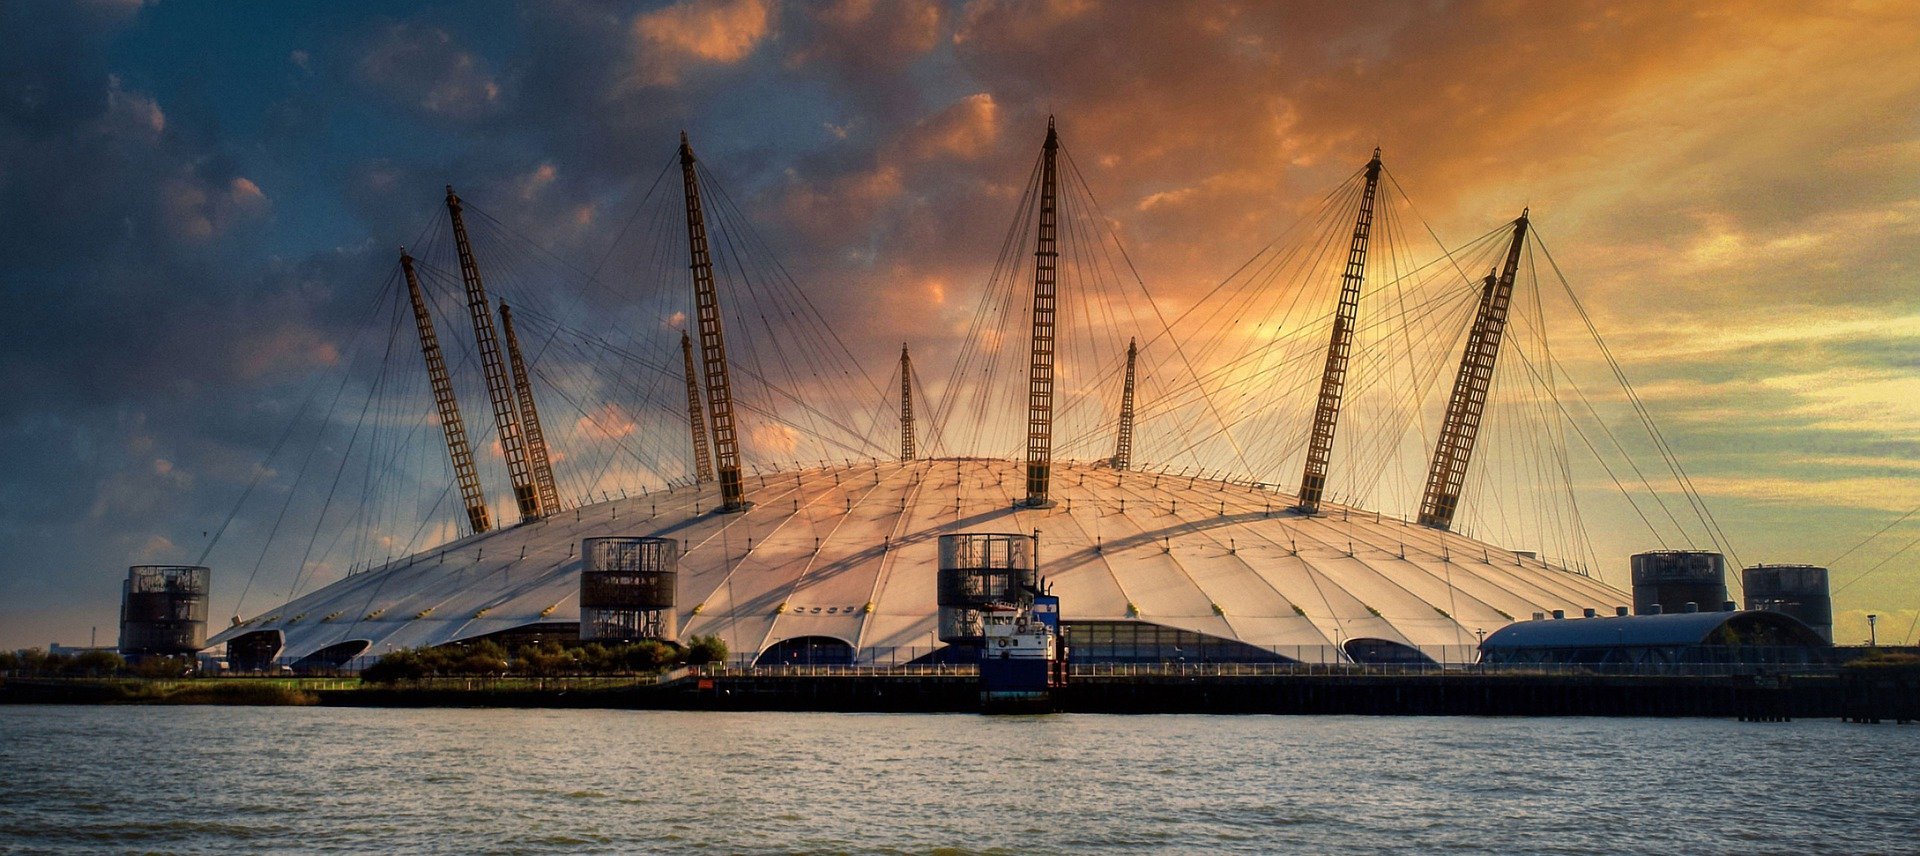 Great value Hotels within walking distance of O2 Arena London - The